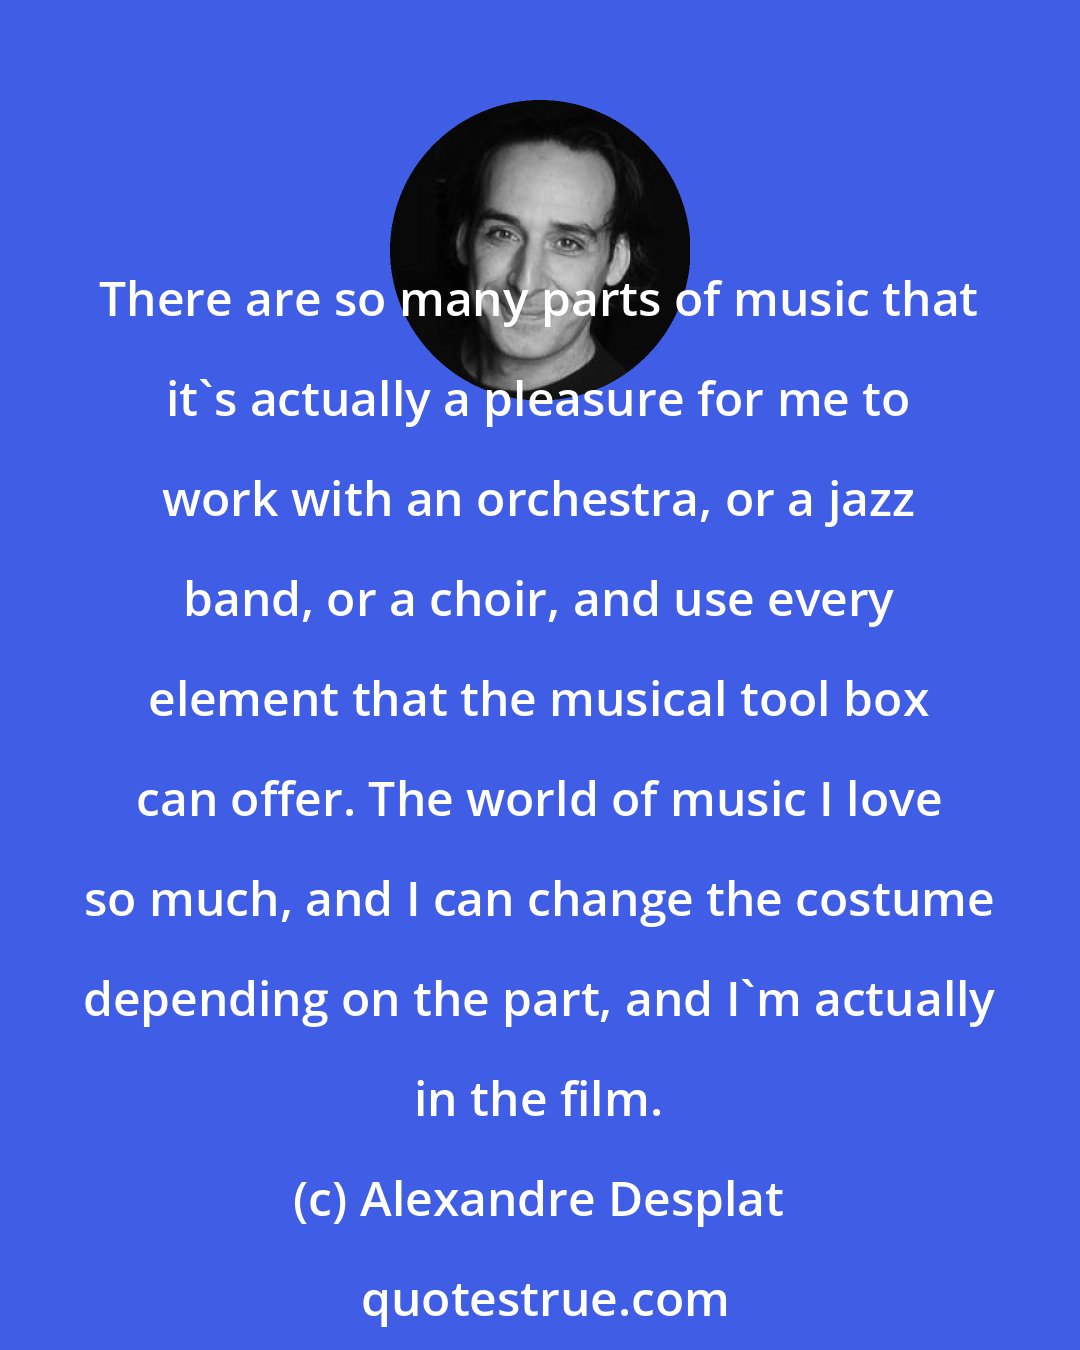 Alexandre Desplat: There are so many parts of music that it's actually a pleasure for me to work with an orchestra, or a jazz band, or a choir, and use every element that the musical tool box can offer. The world of music I love so much, and I can change the costume depending on the part, and I'm actually in the film.